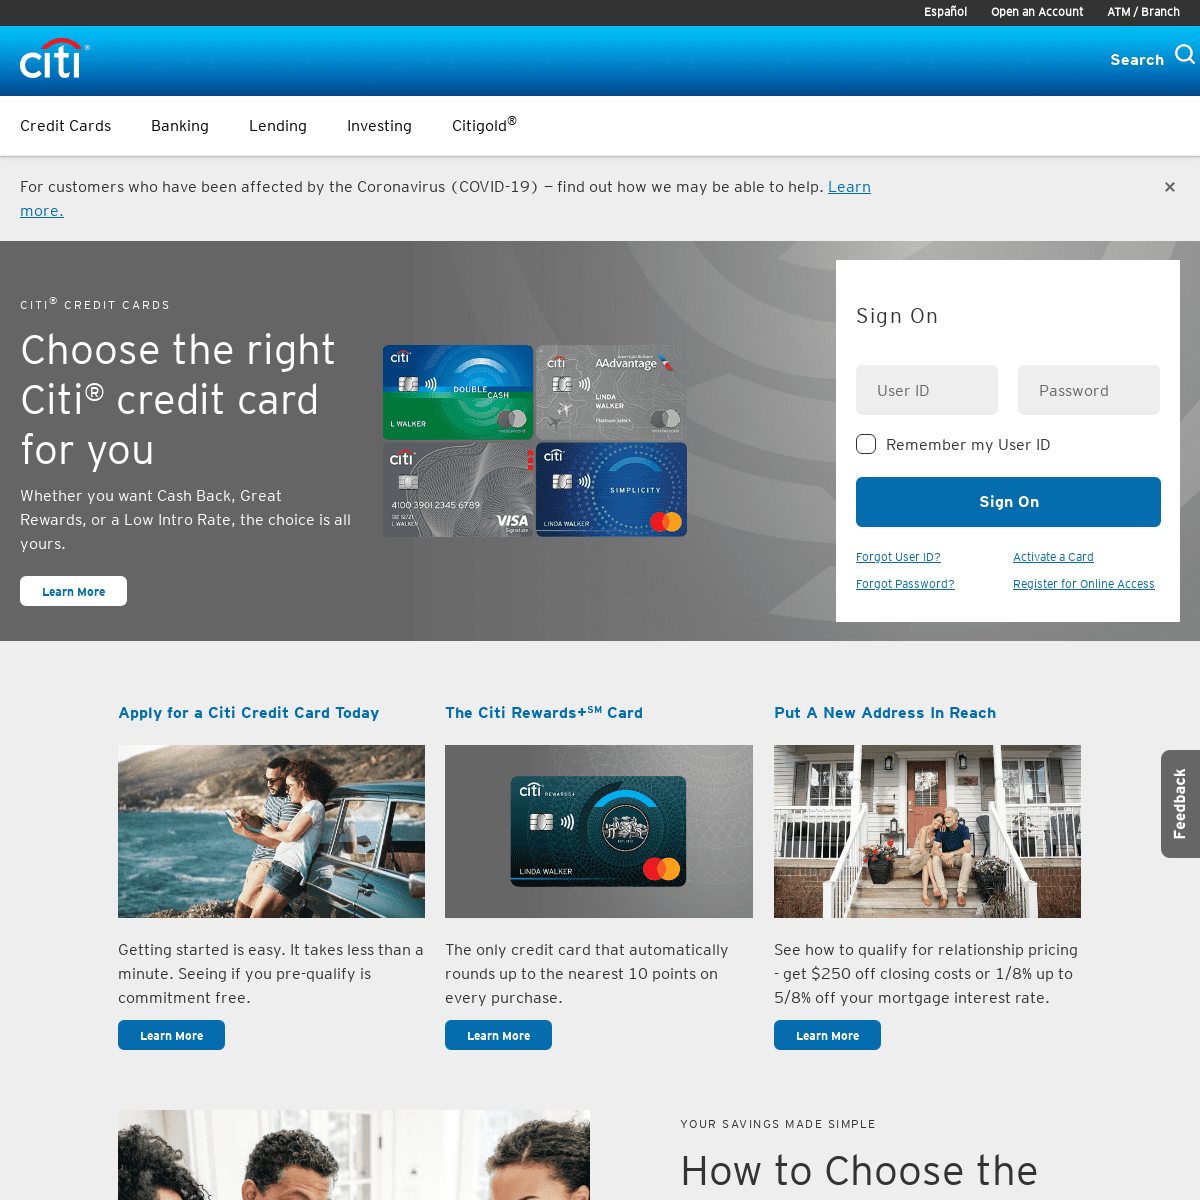 A complete backup of citibank.com